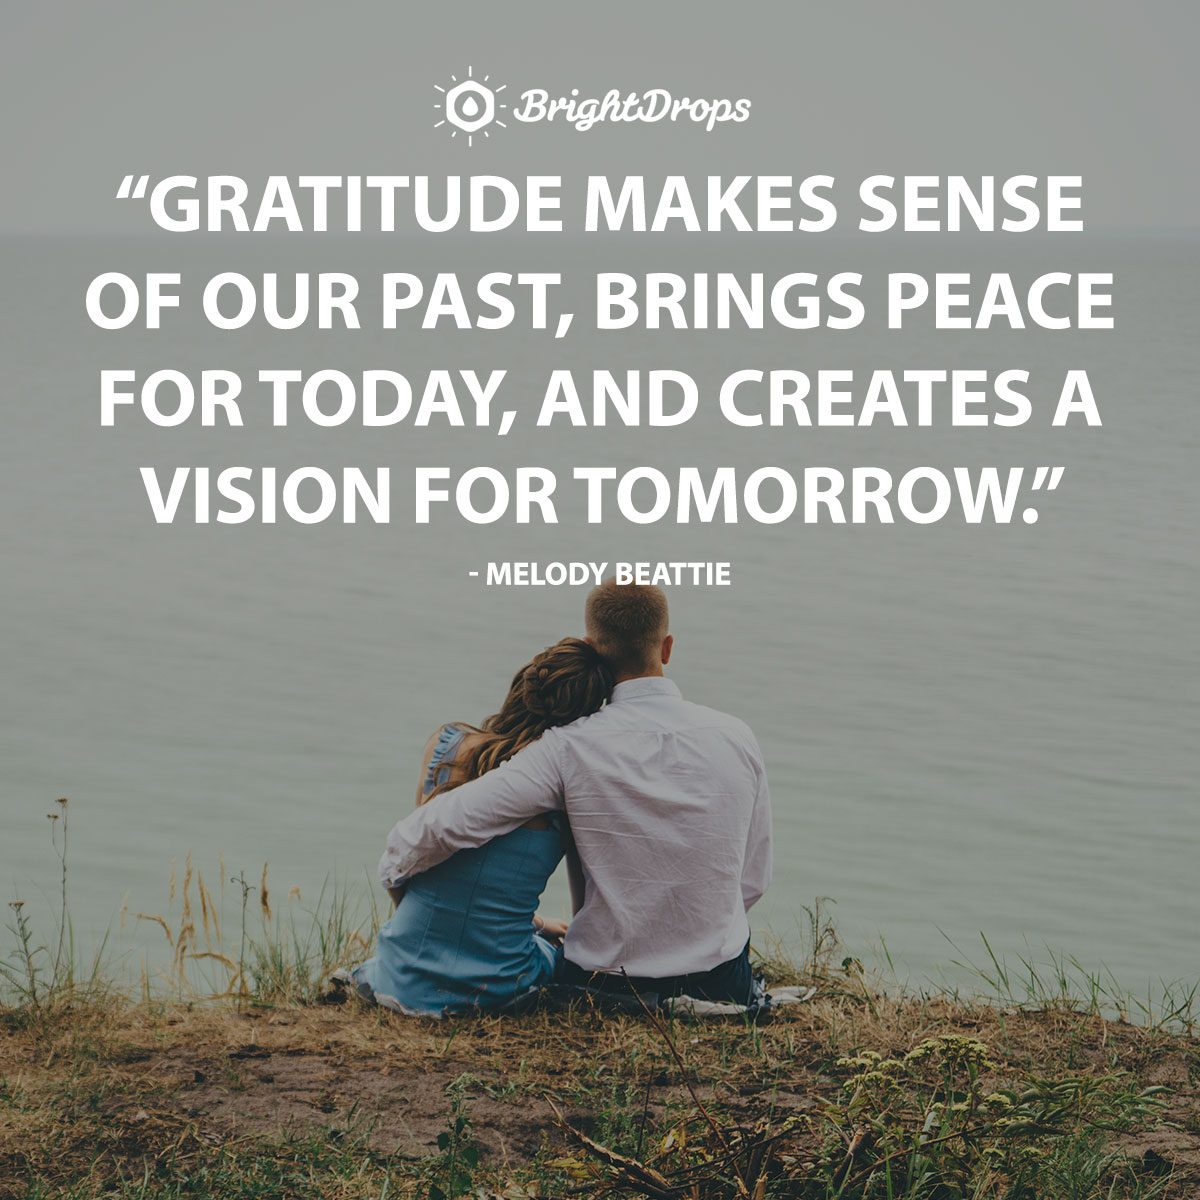 37 Gratitude Quotes to Make You Appreciate Your Life and Relationships -  Bright Drops